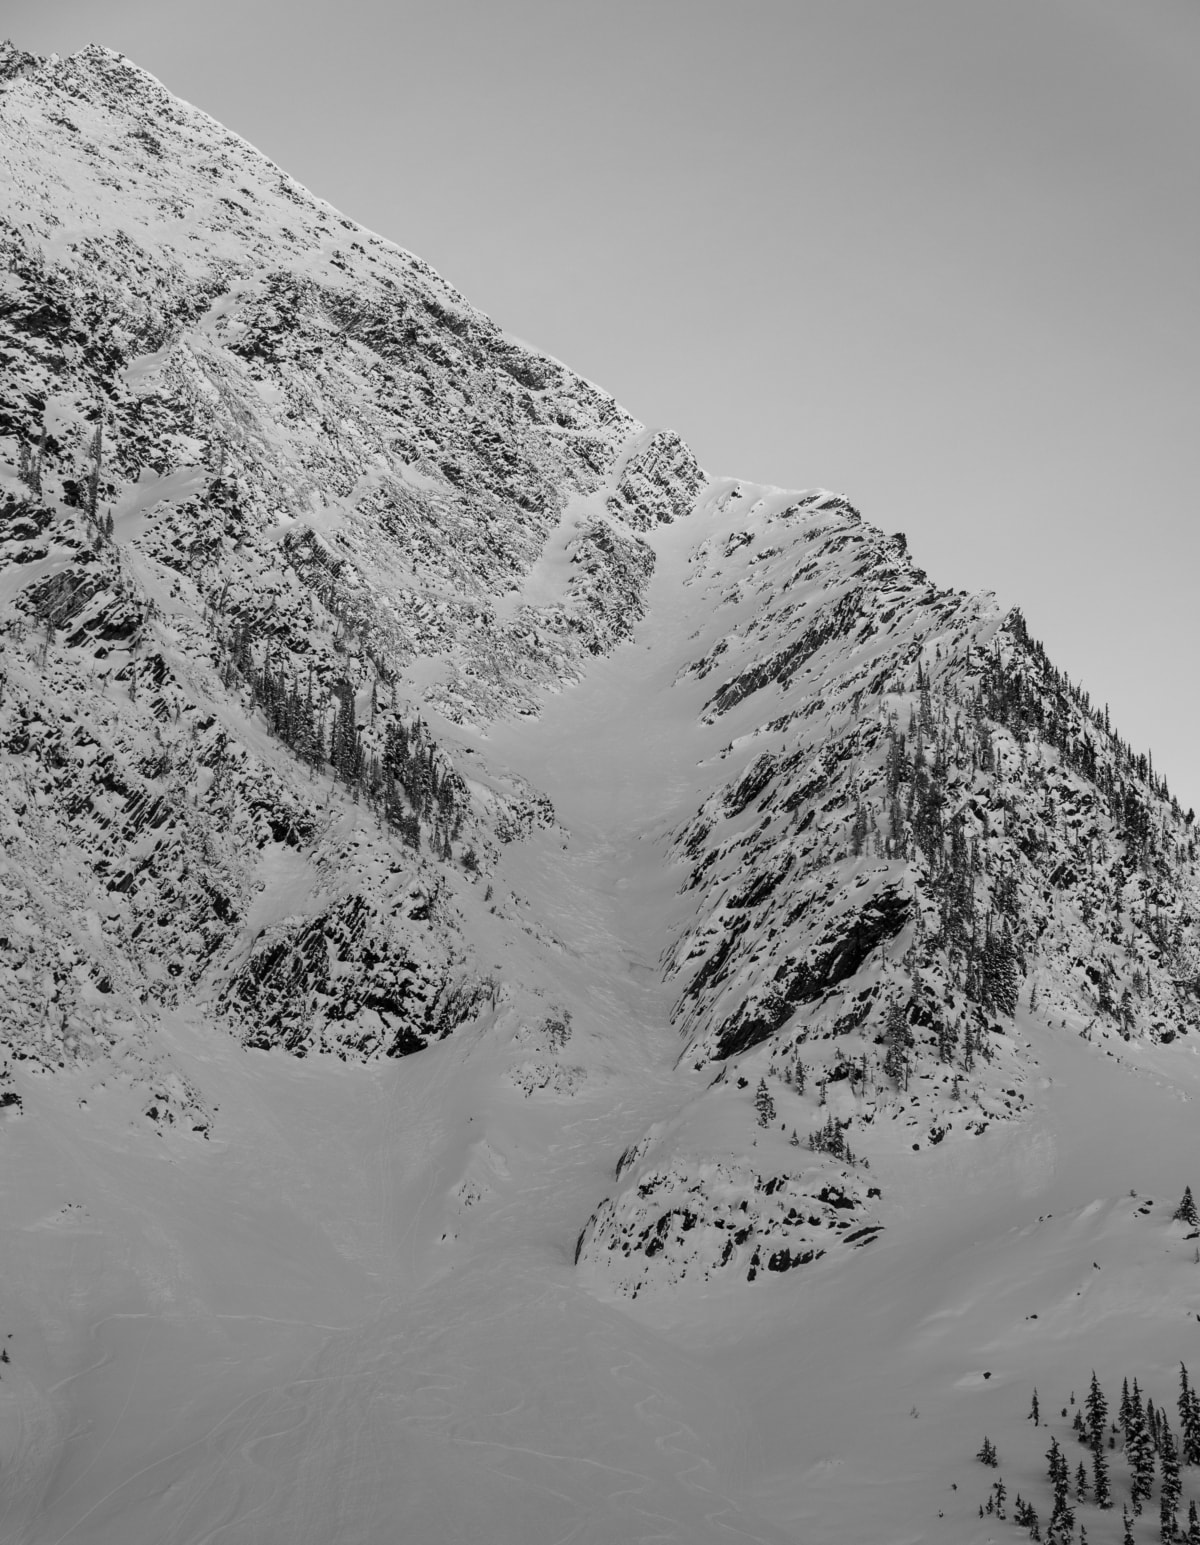 early season look at sts couloir very rugged